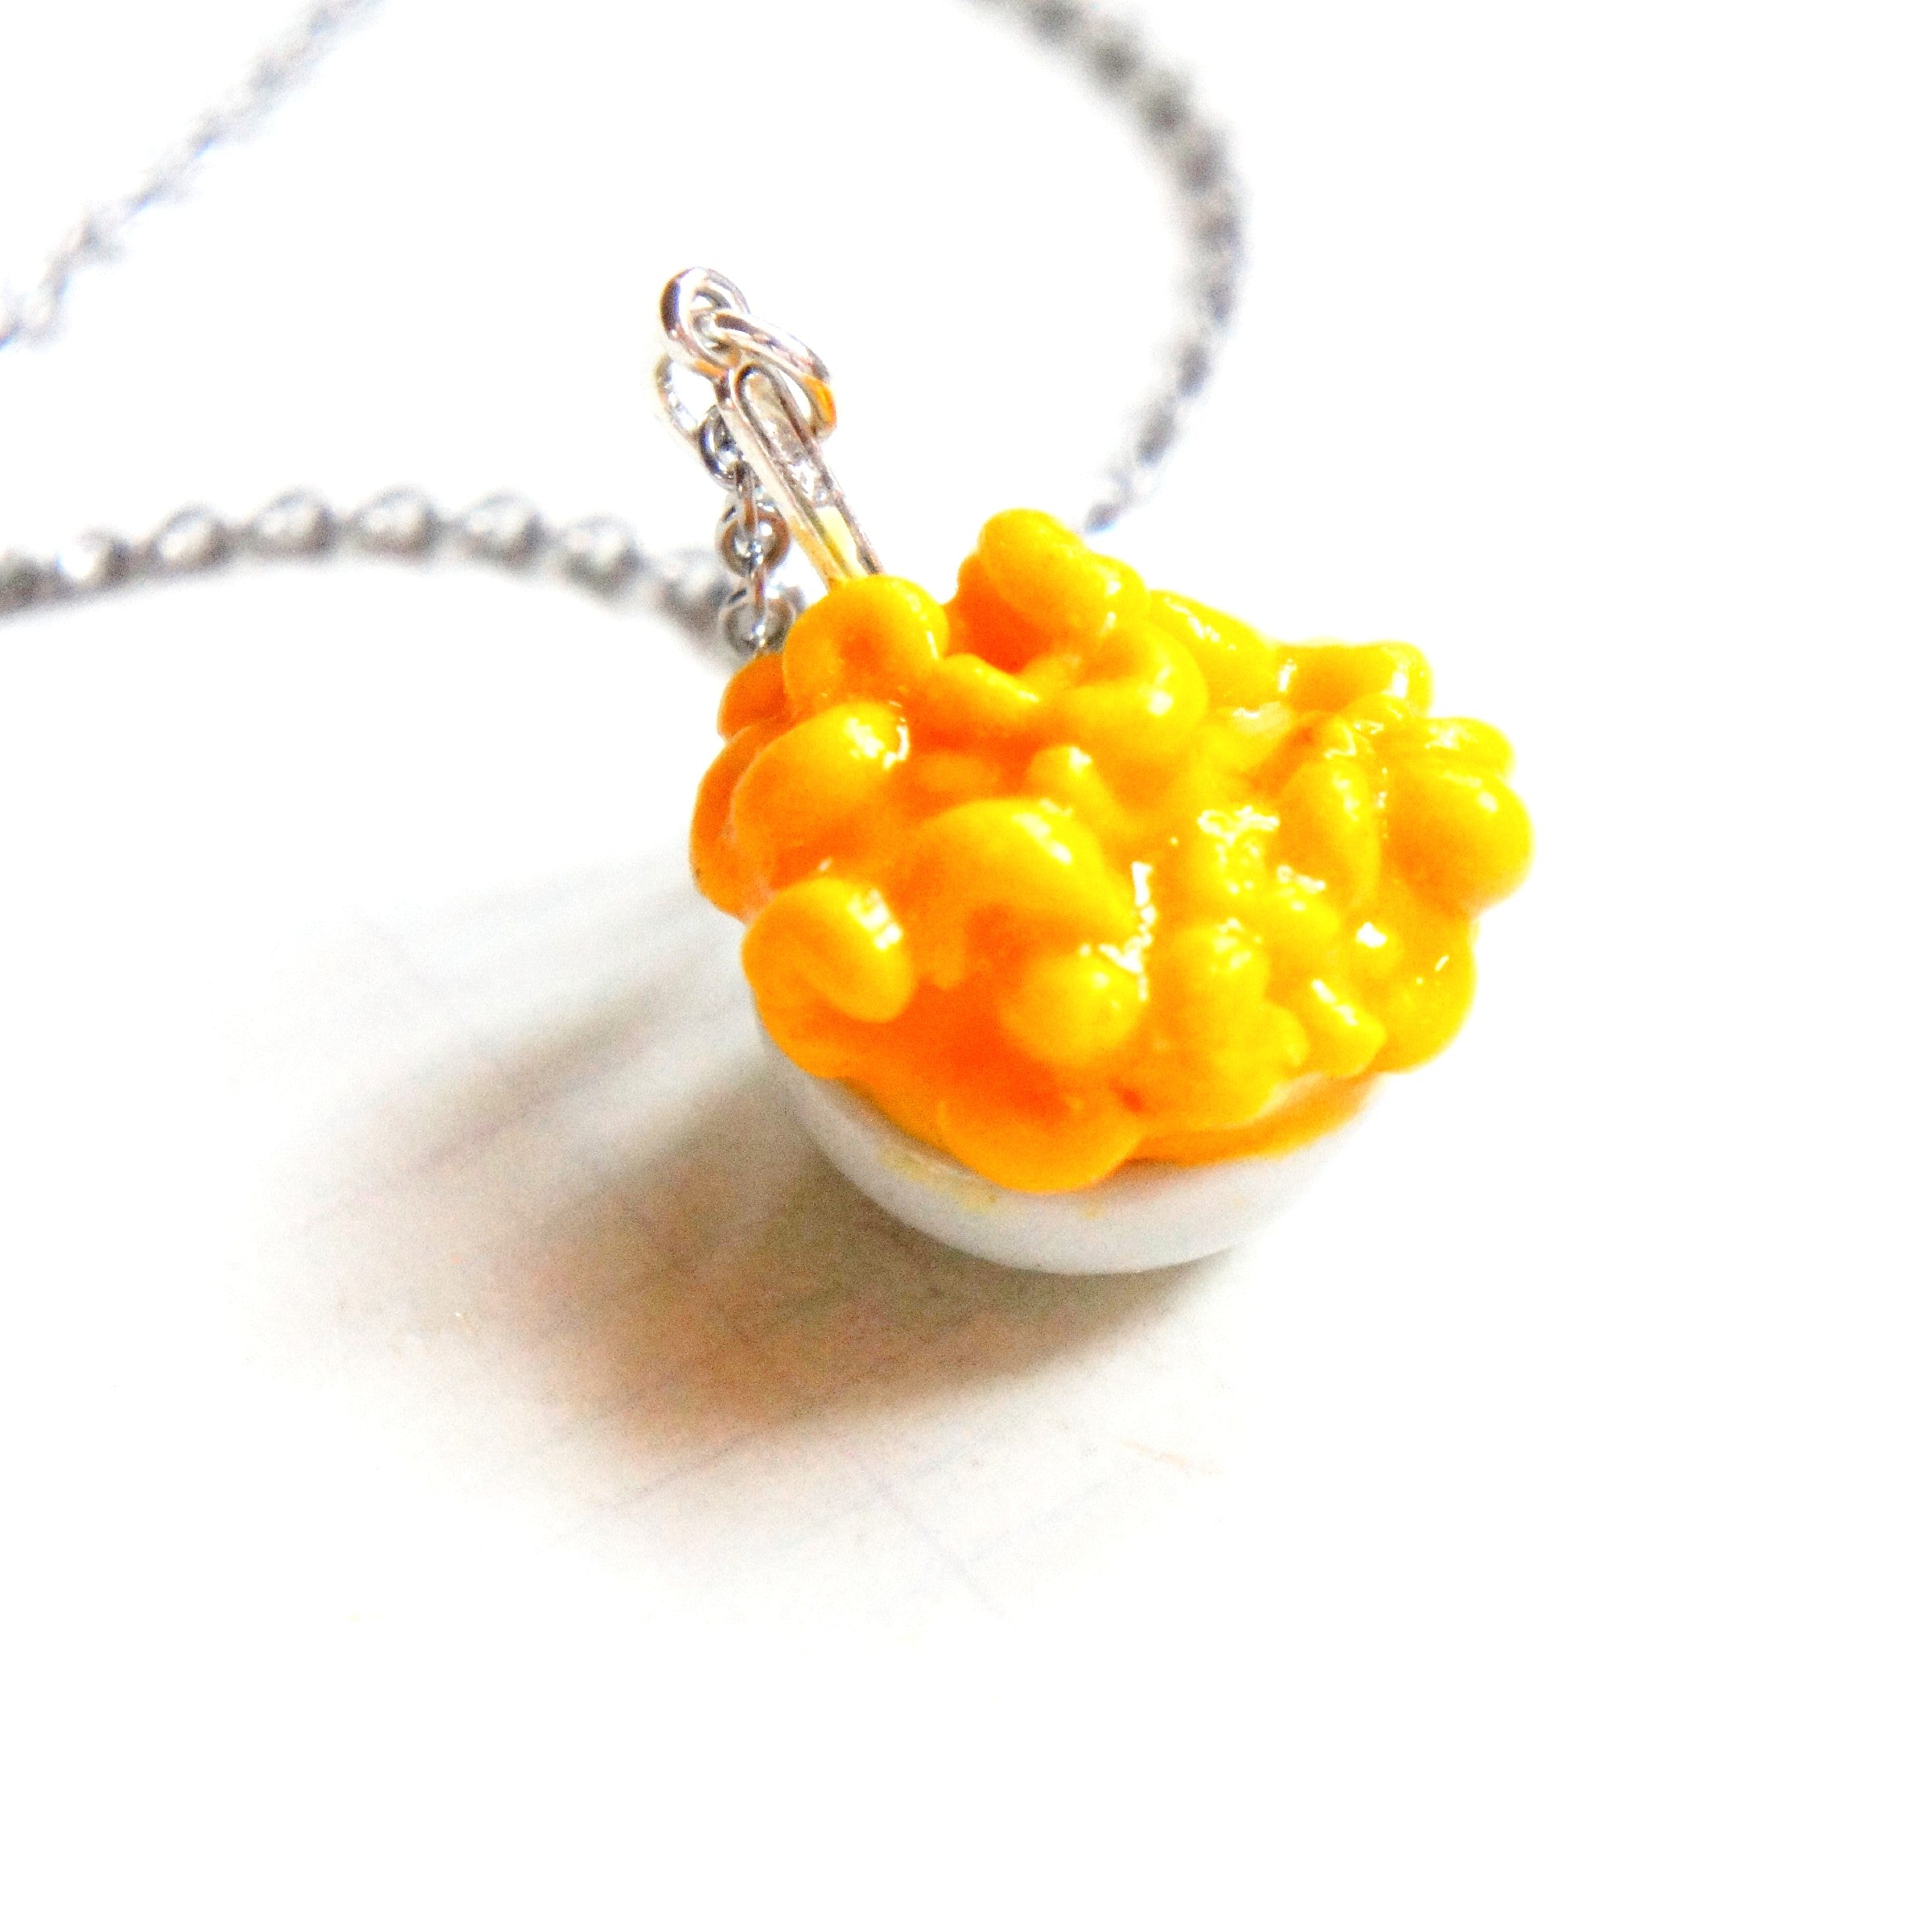 Mac and Cheese Necklace - Jillicious charms and accessories